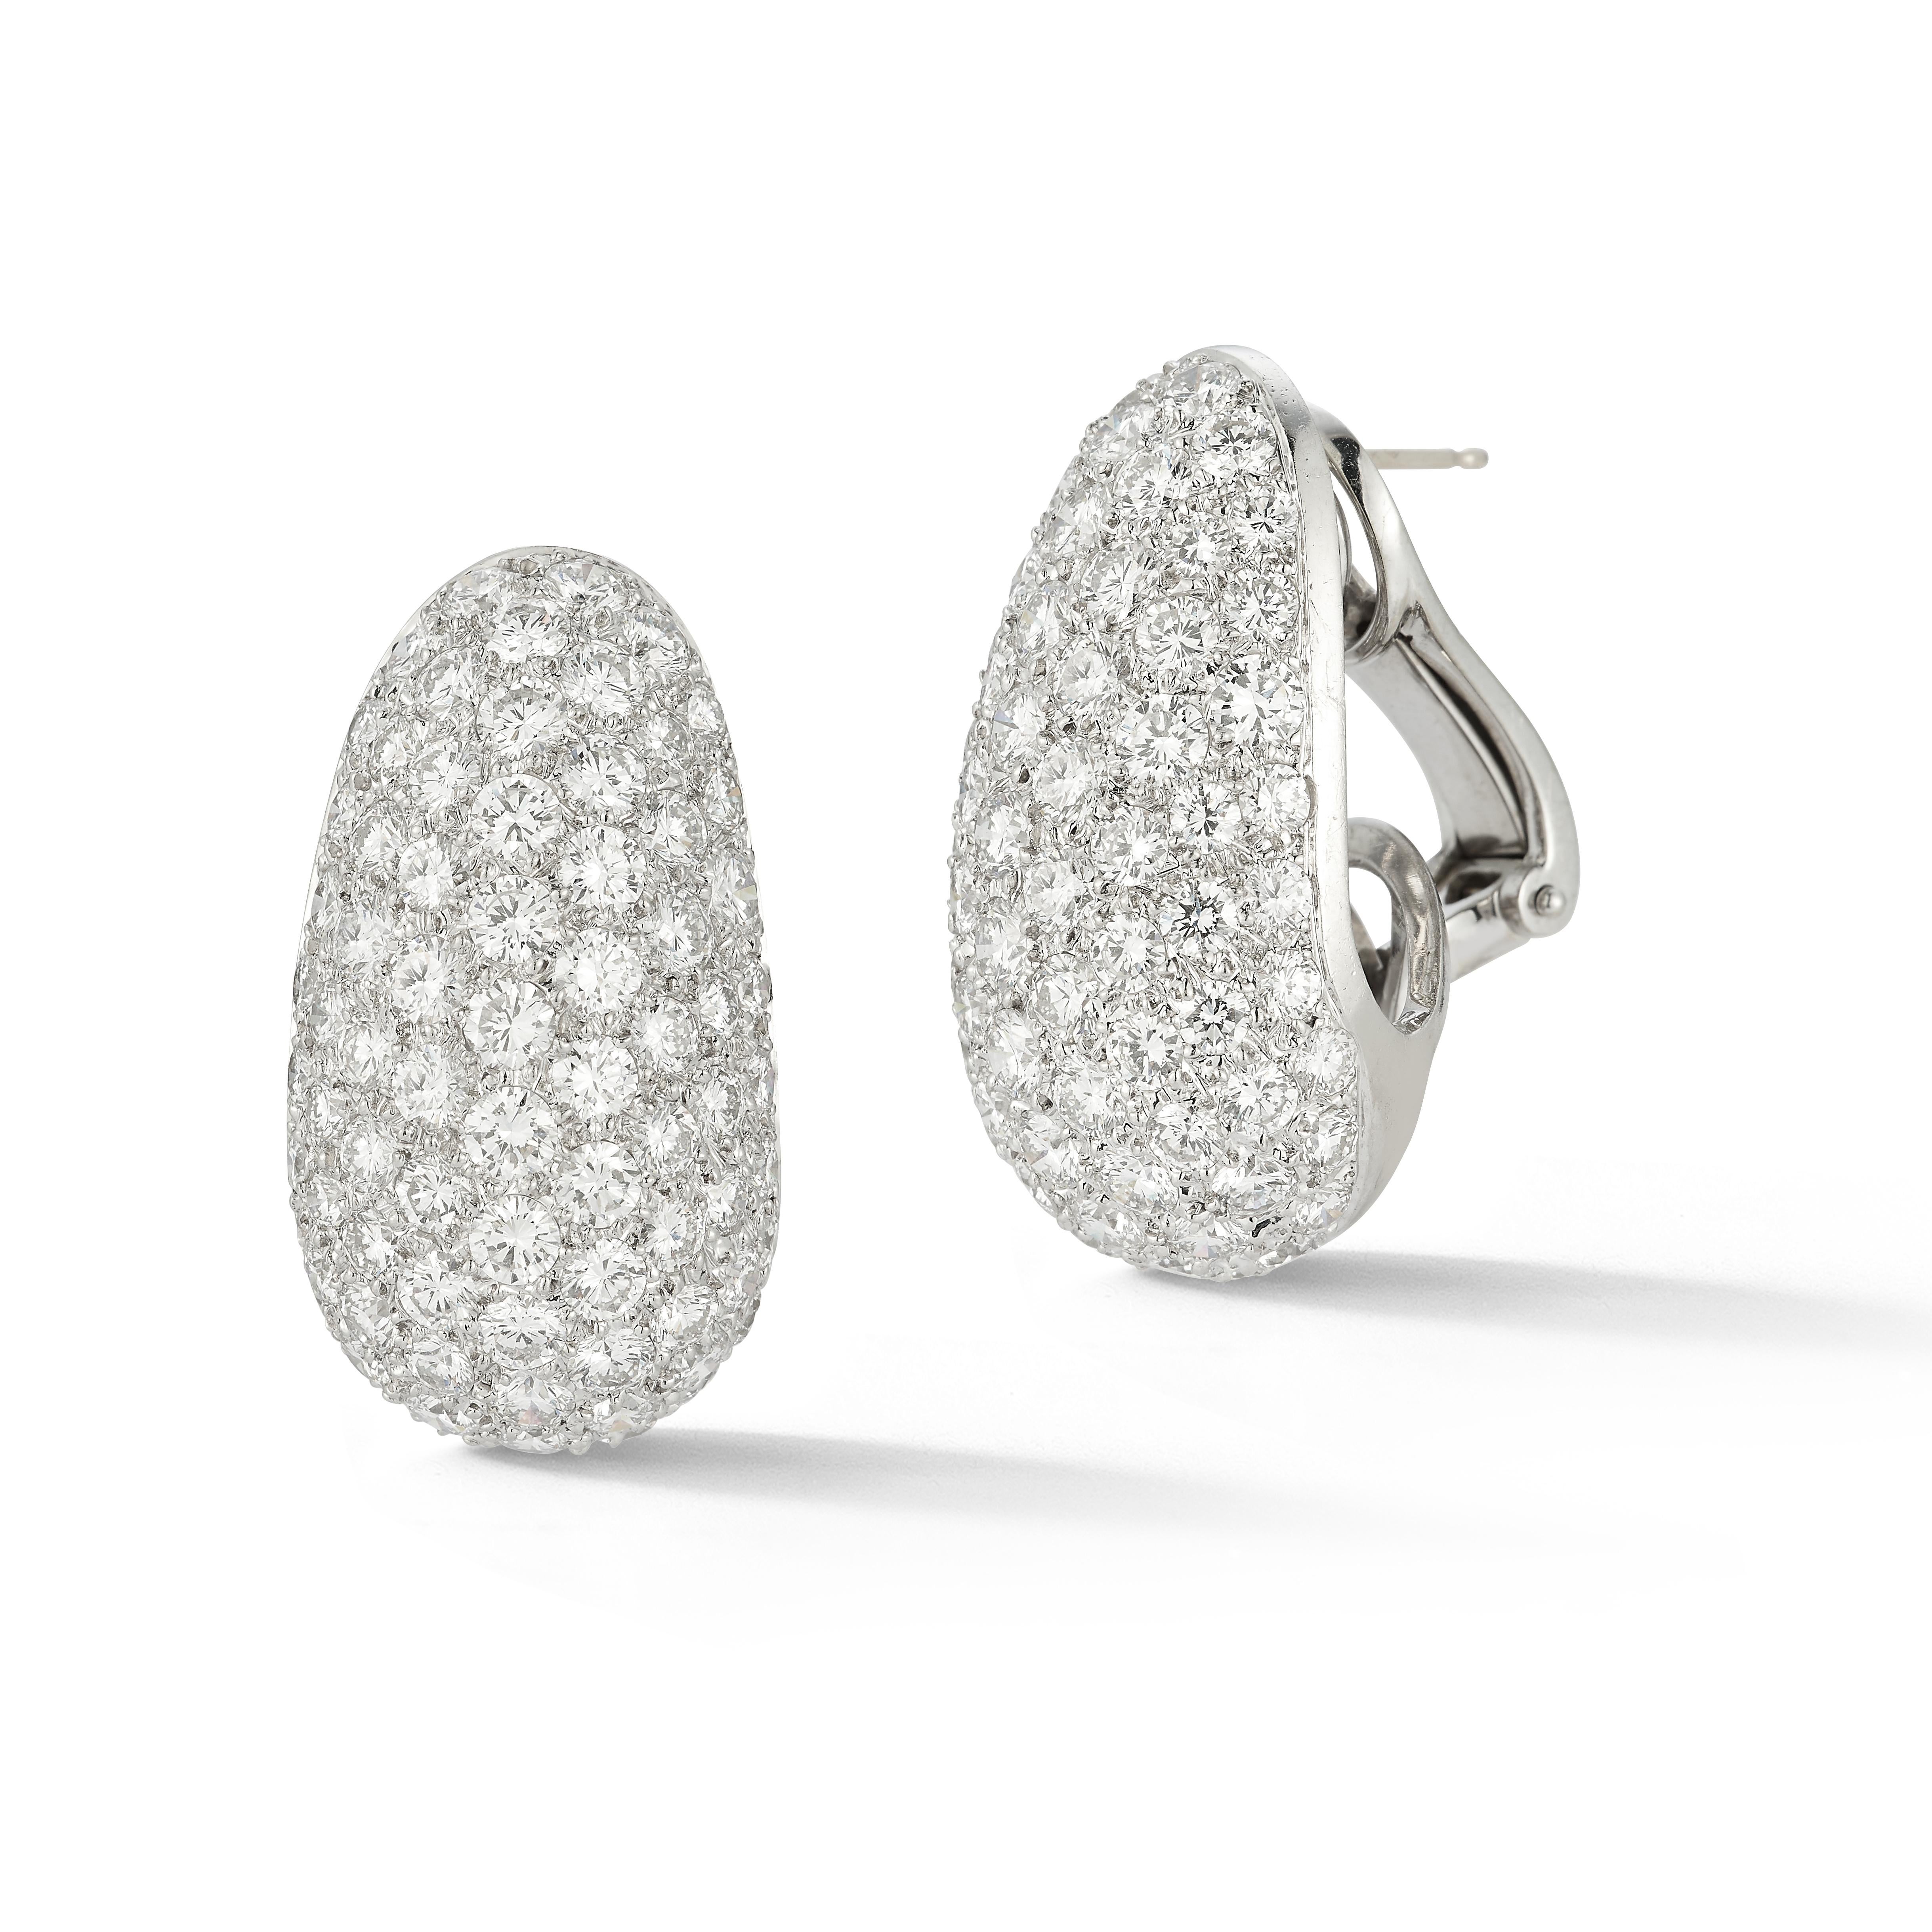 Van Cleef & Arpels Pave Diamond Earrings

A pair of platinum earrings set with 154 round cut diamonds weighing approximately 10.78 carats

Signed VCA and numbered

Length: 1.13